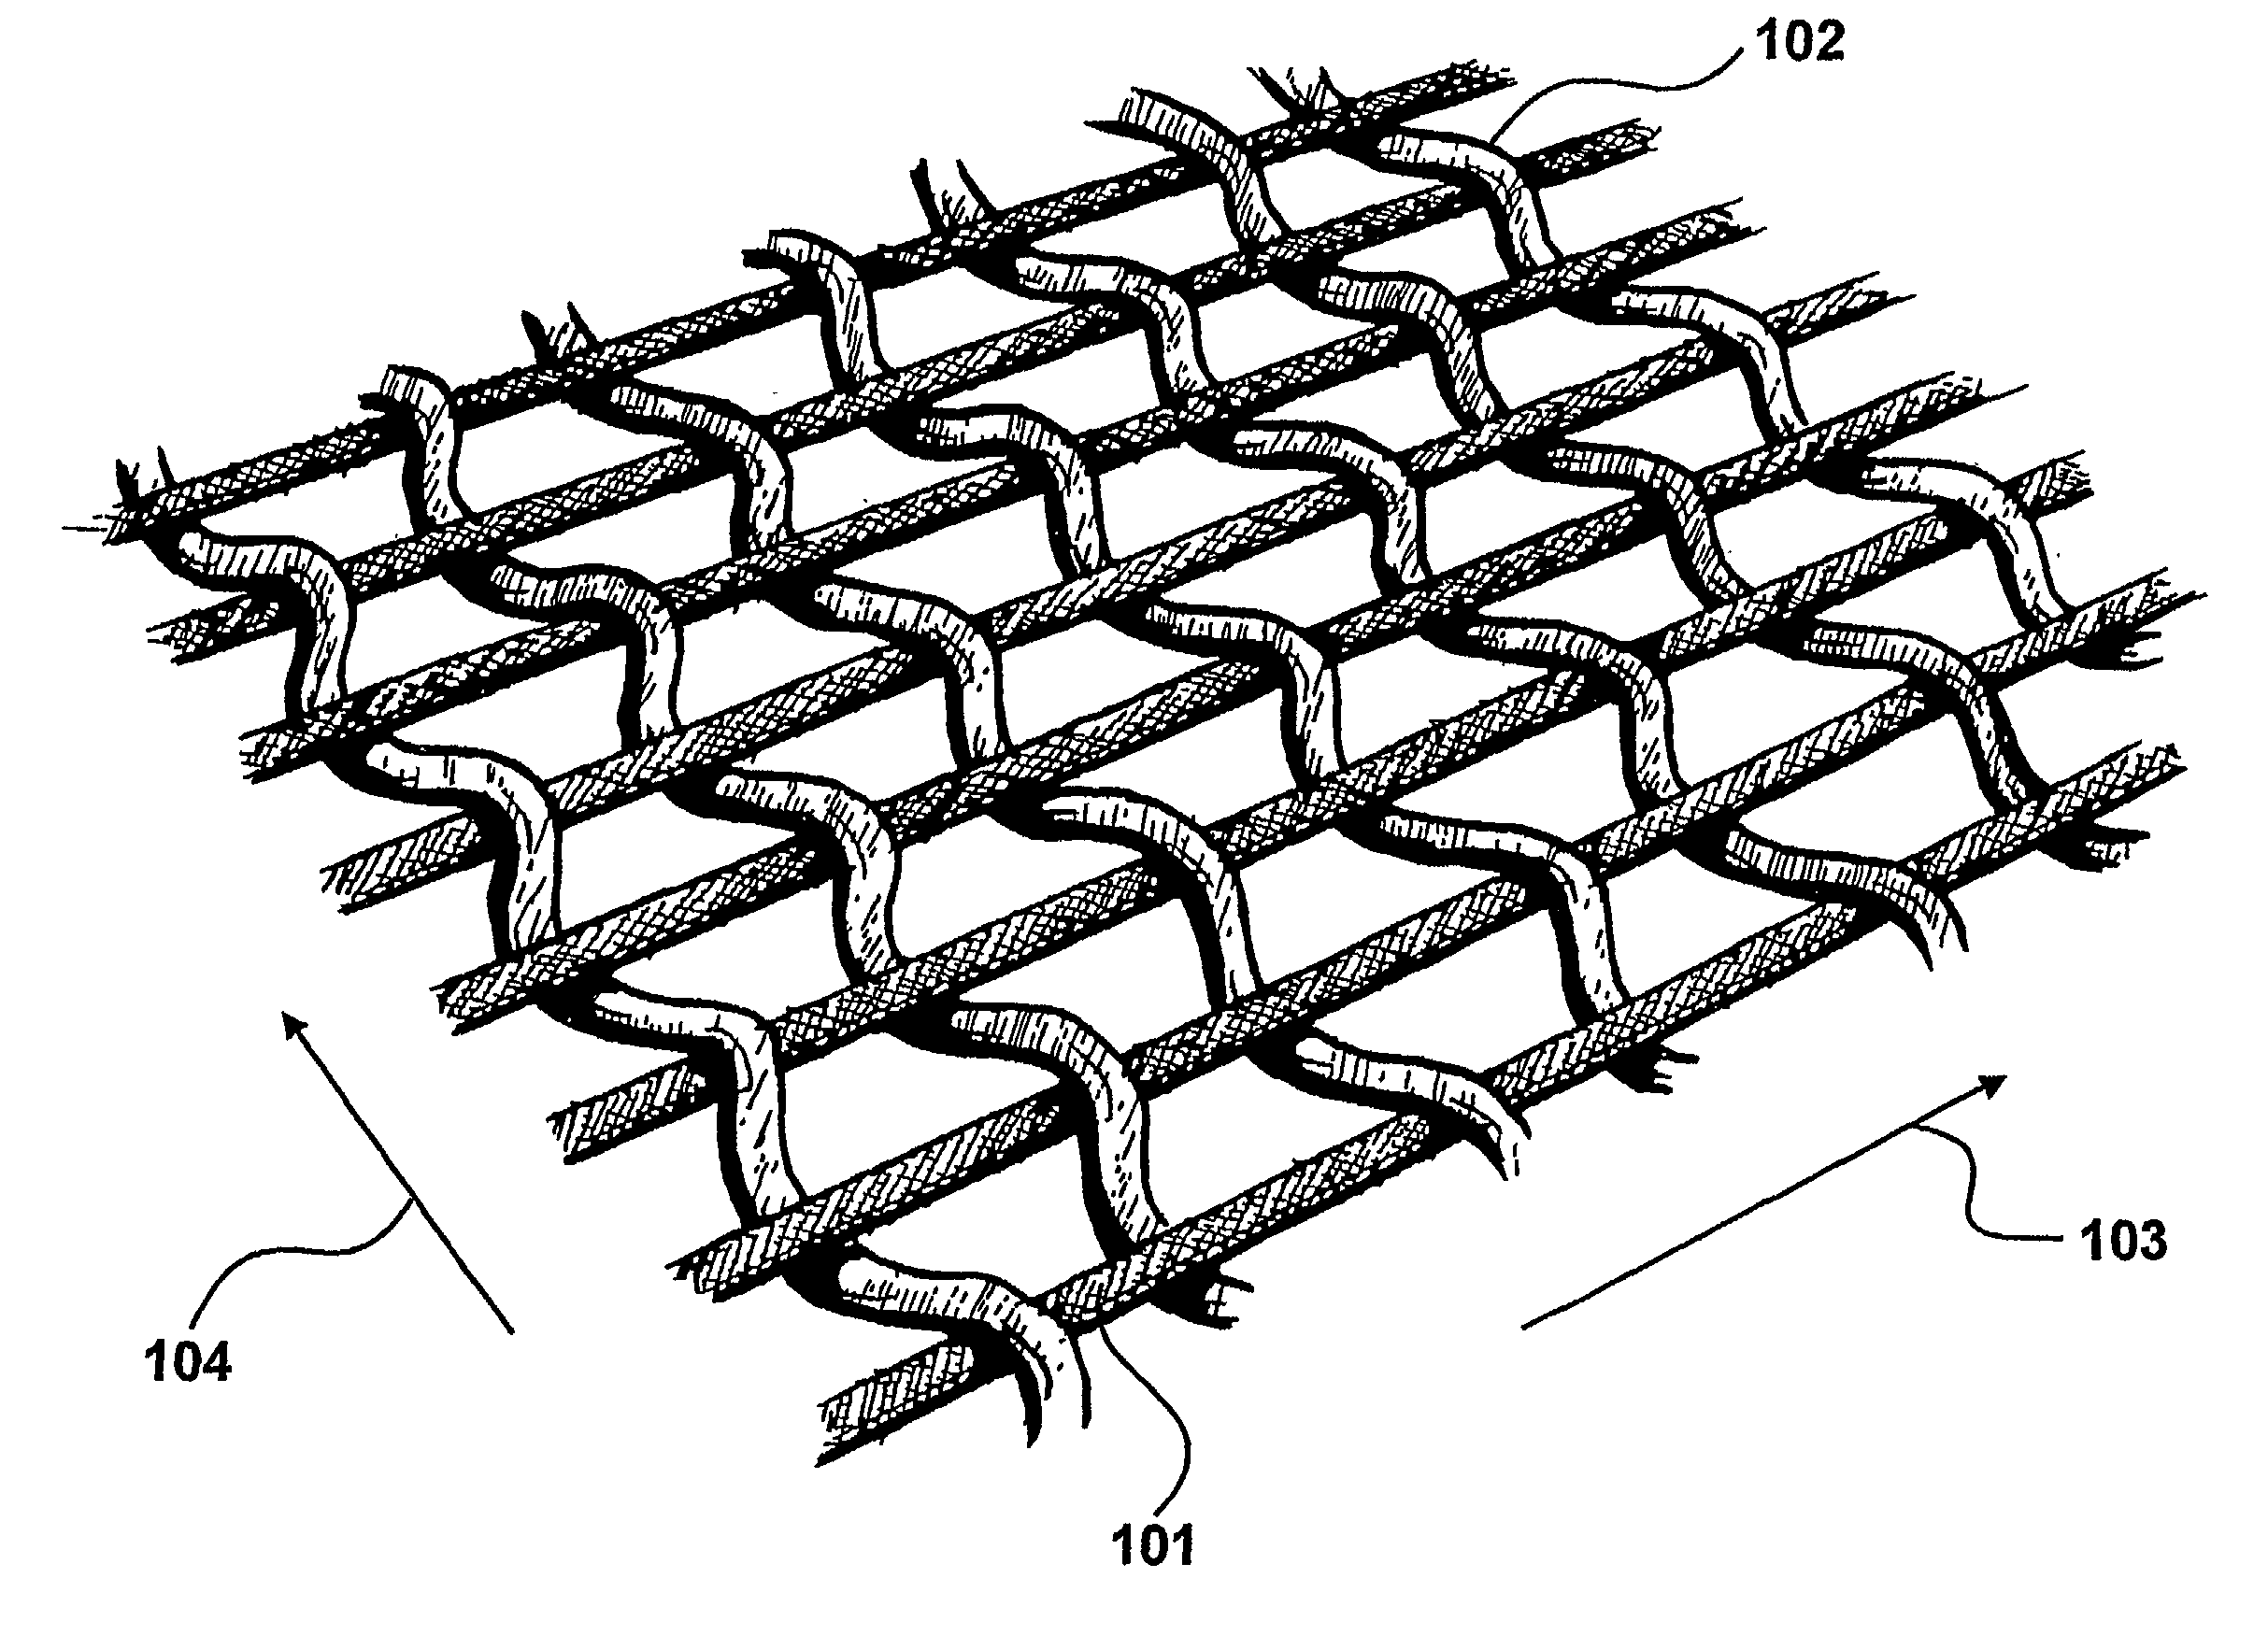 Detector constructed from electrically conducting fabric